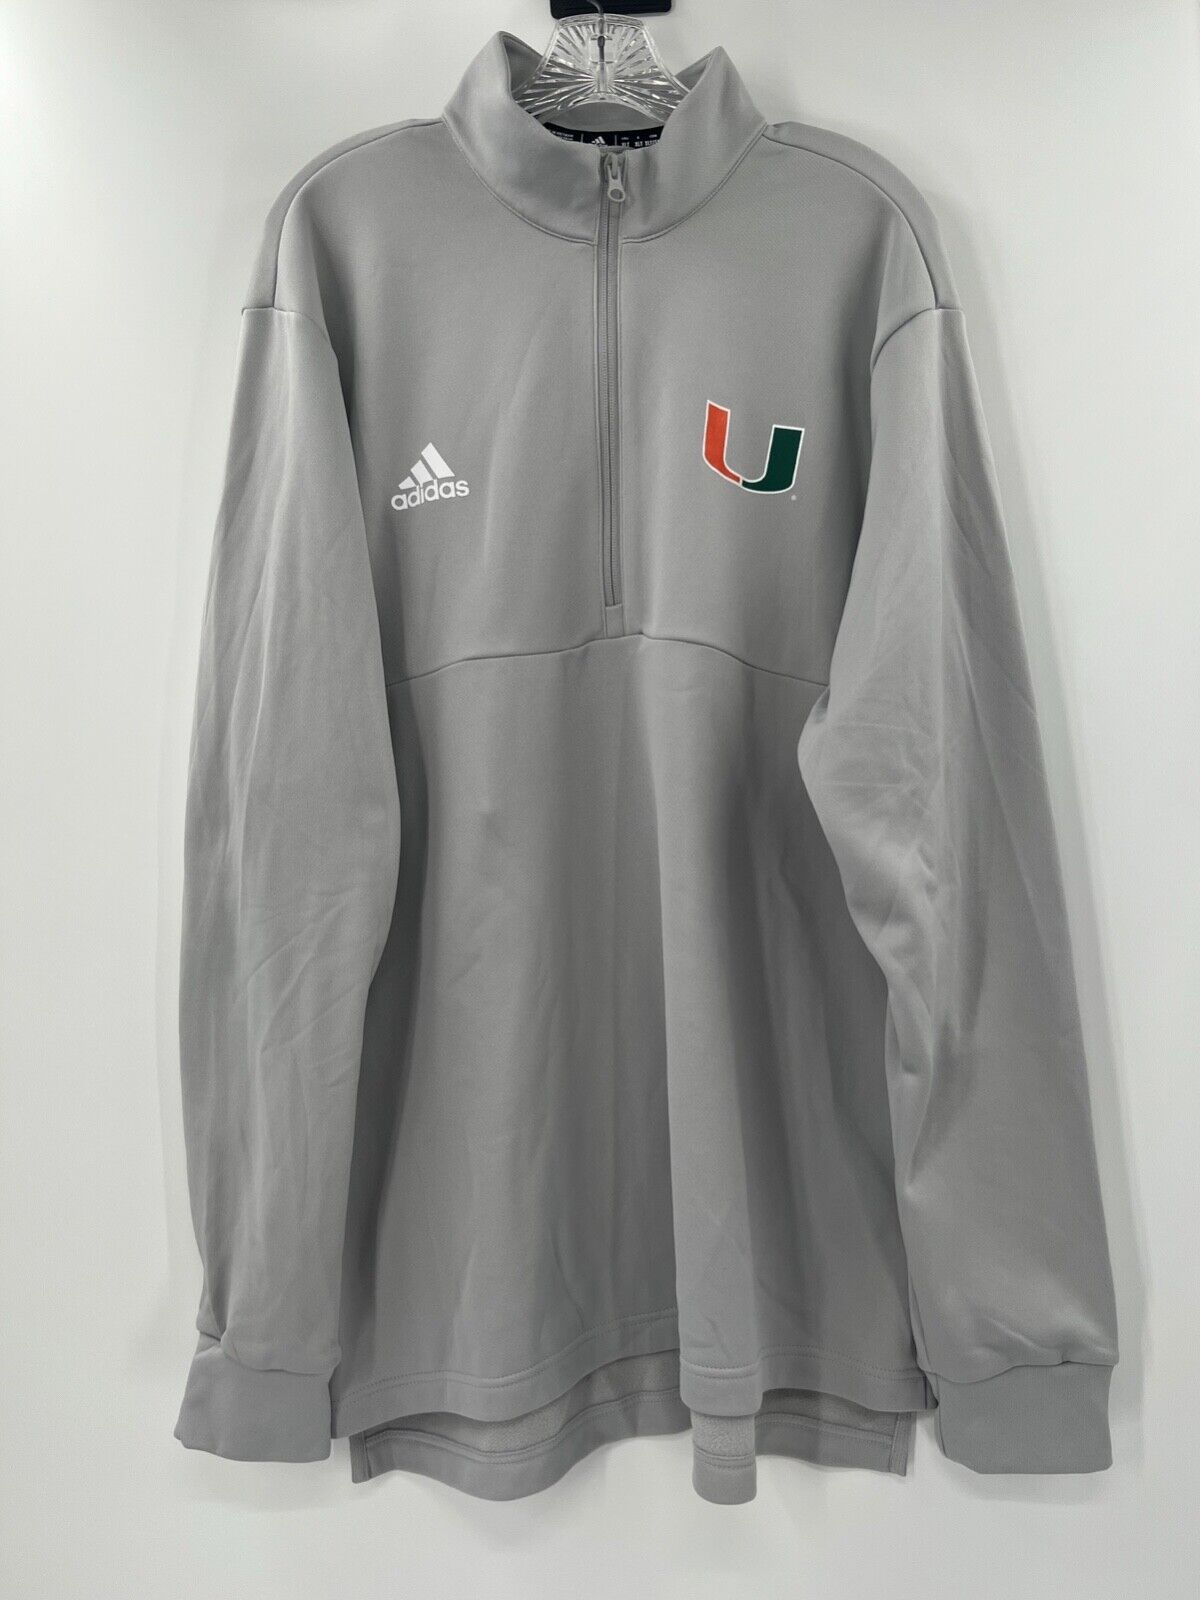 Miami Hurricanes Game Used Gray Adidas Long Sleeve Dri Fit W/ 1/4 Zip Size Xlt